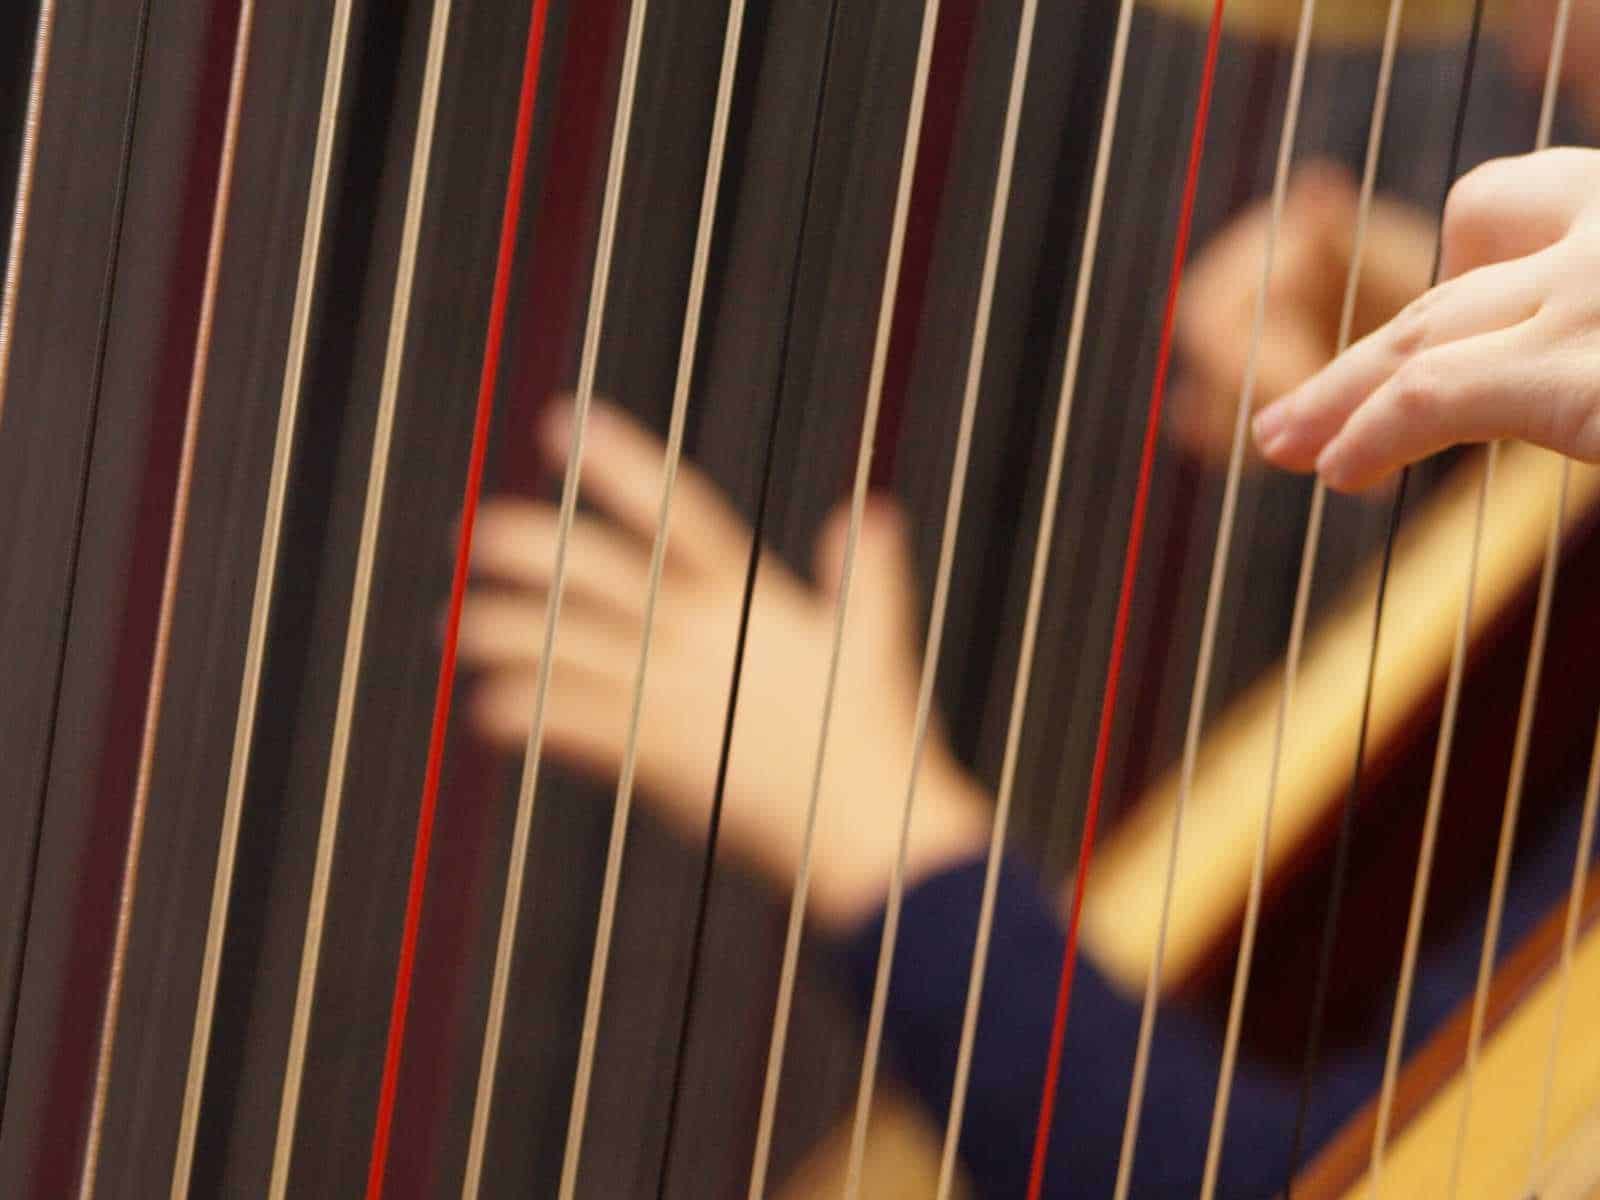 Harp - Instruments - Discover Music - Classic FM